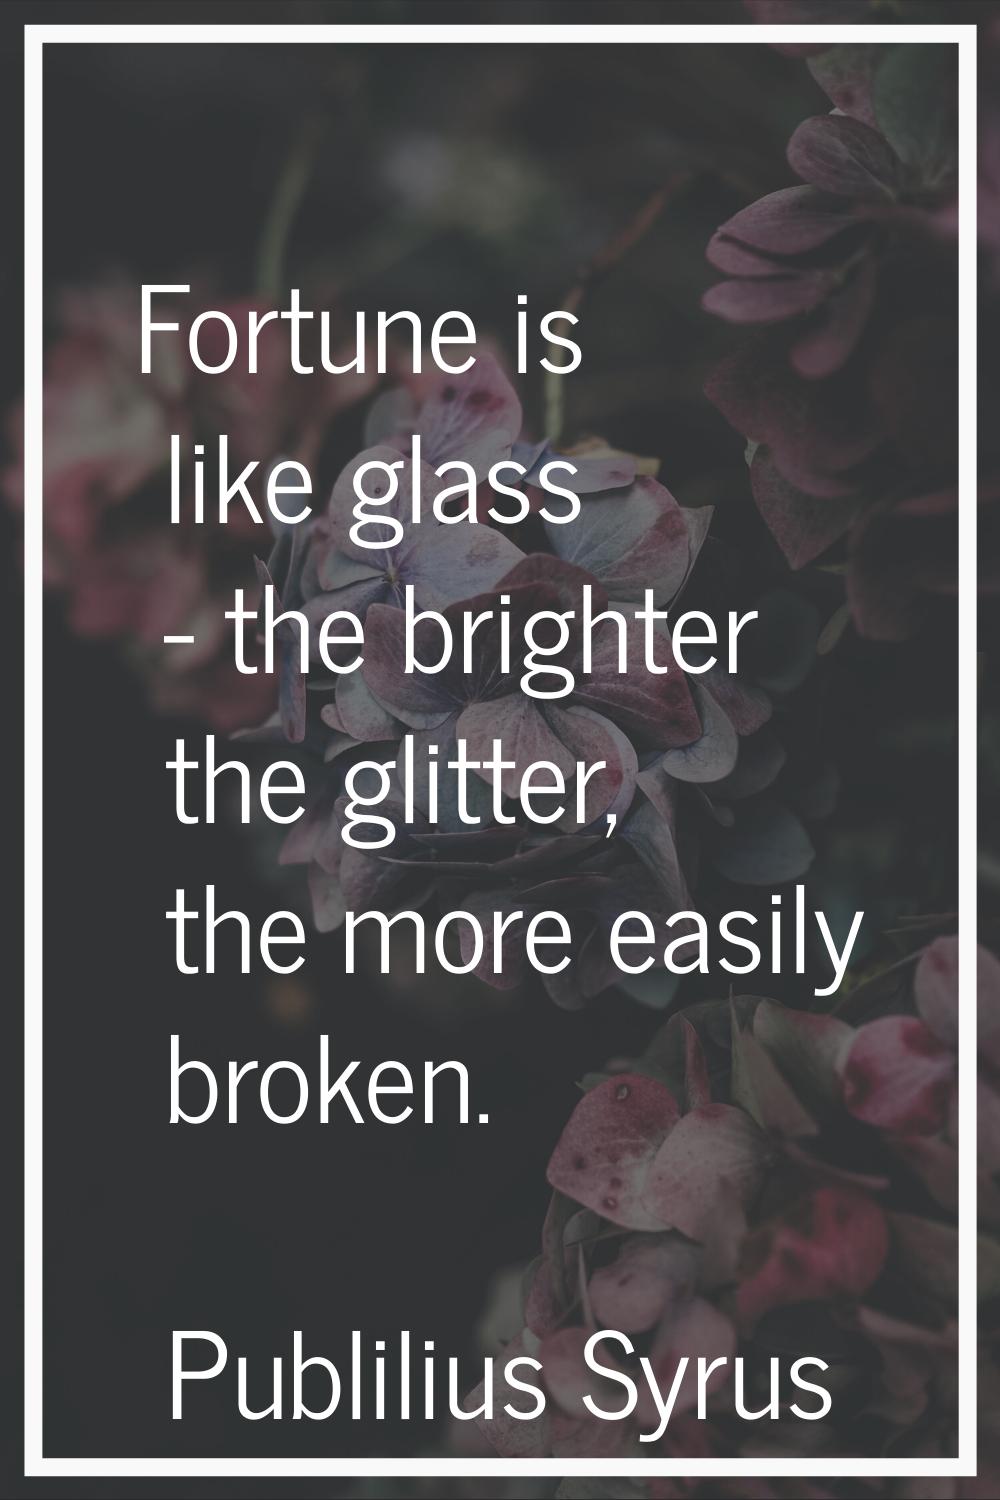 Fortune is like glass - the brighter the glitter, the more easily broken.